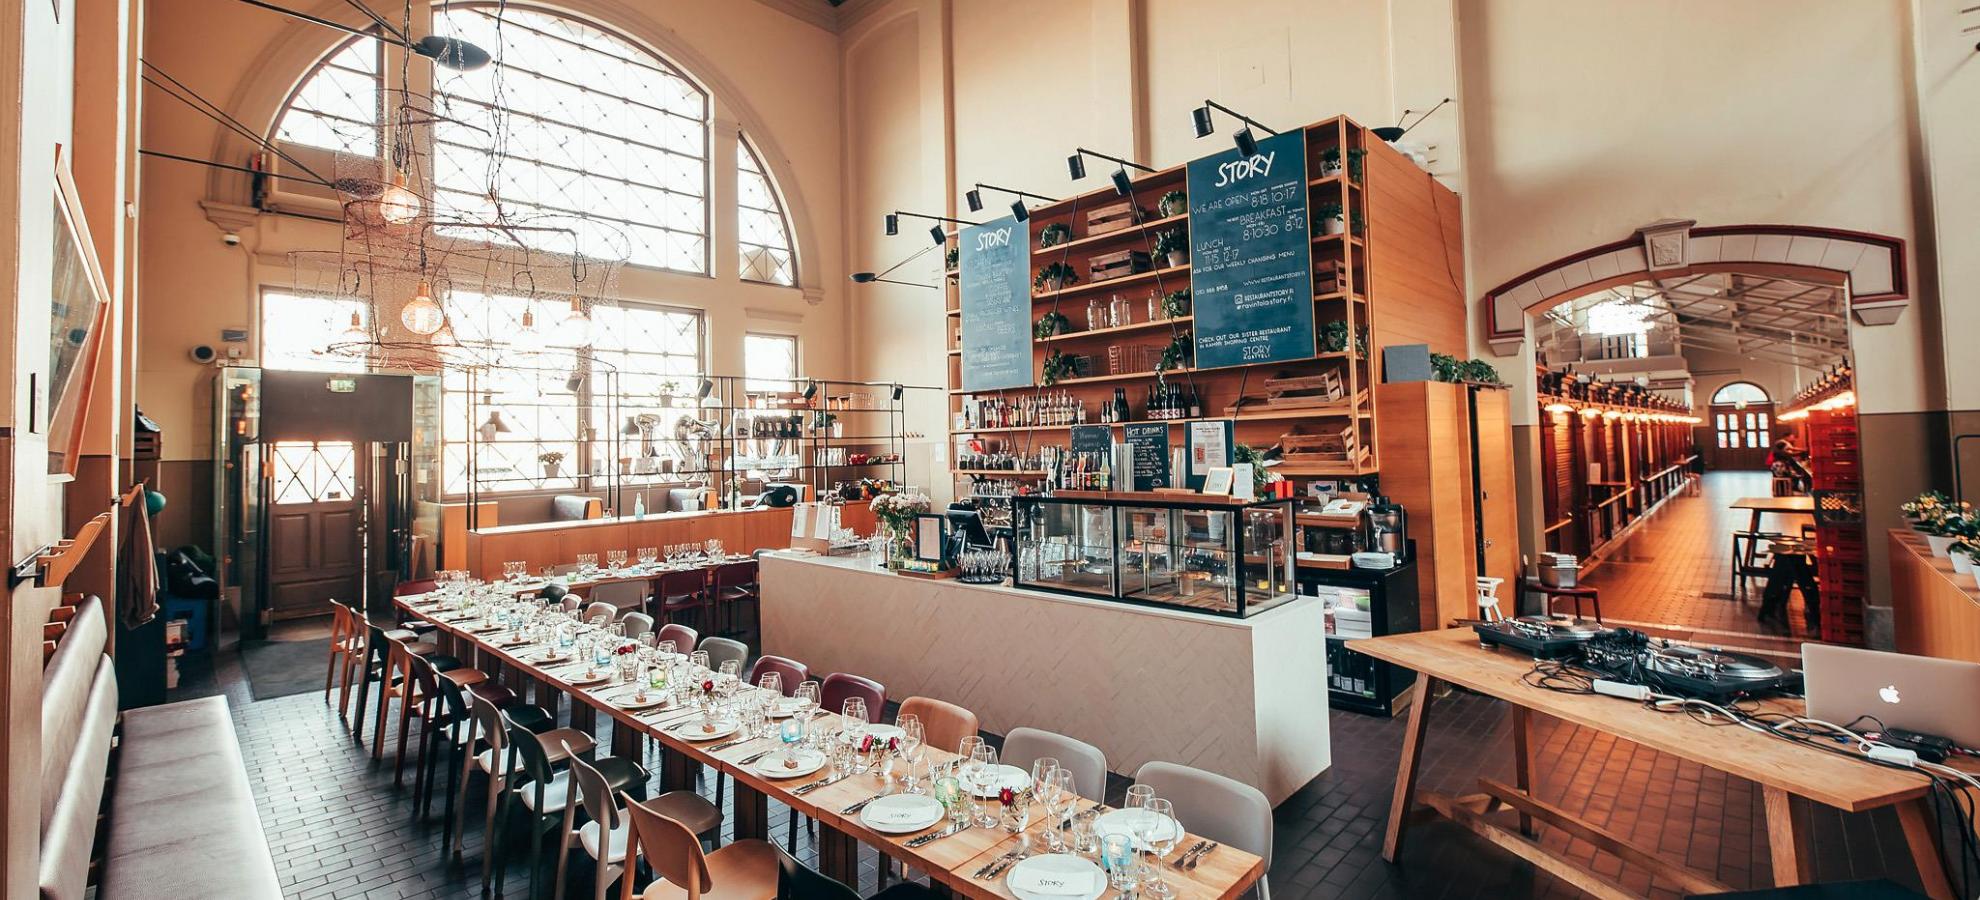 Story restaurant inside Old Market Hall, a tall, open space with large windows towards the left and the main market leading away down a corridor to the right of the restaurant's main counter. Behind the counter are a set of tall, wide shelves whereas in front of the counter, a long table has been set with dozens of chairs for a private event.